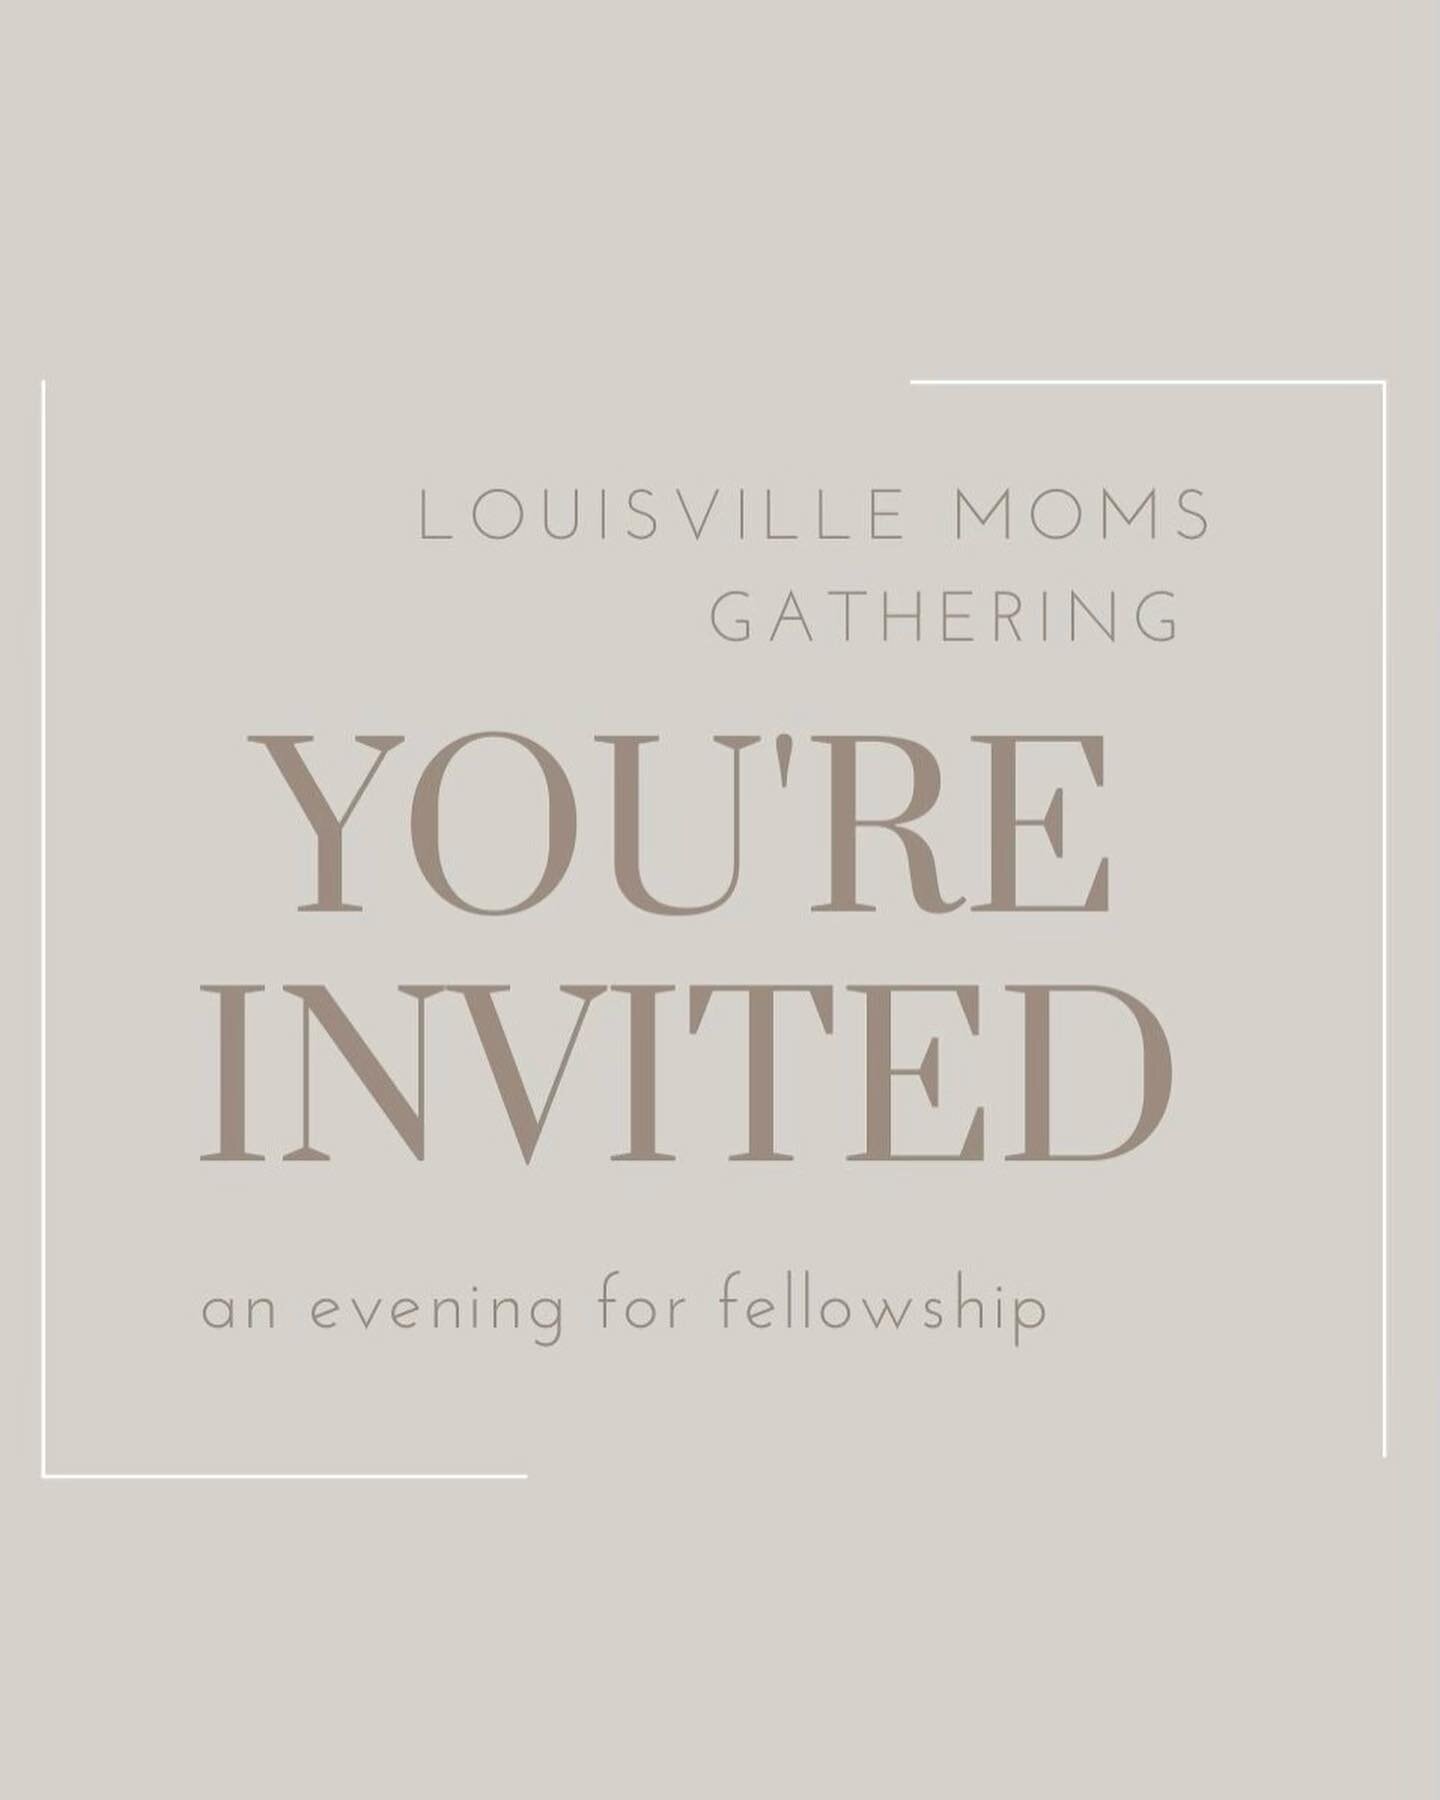 This night has been on my heart for some time now. I&rsquo;m excited to finally invite you to a Louisville Moms  Gathering! Mark your Calendar! 

I hope you&rsquo;ll join us🤎